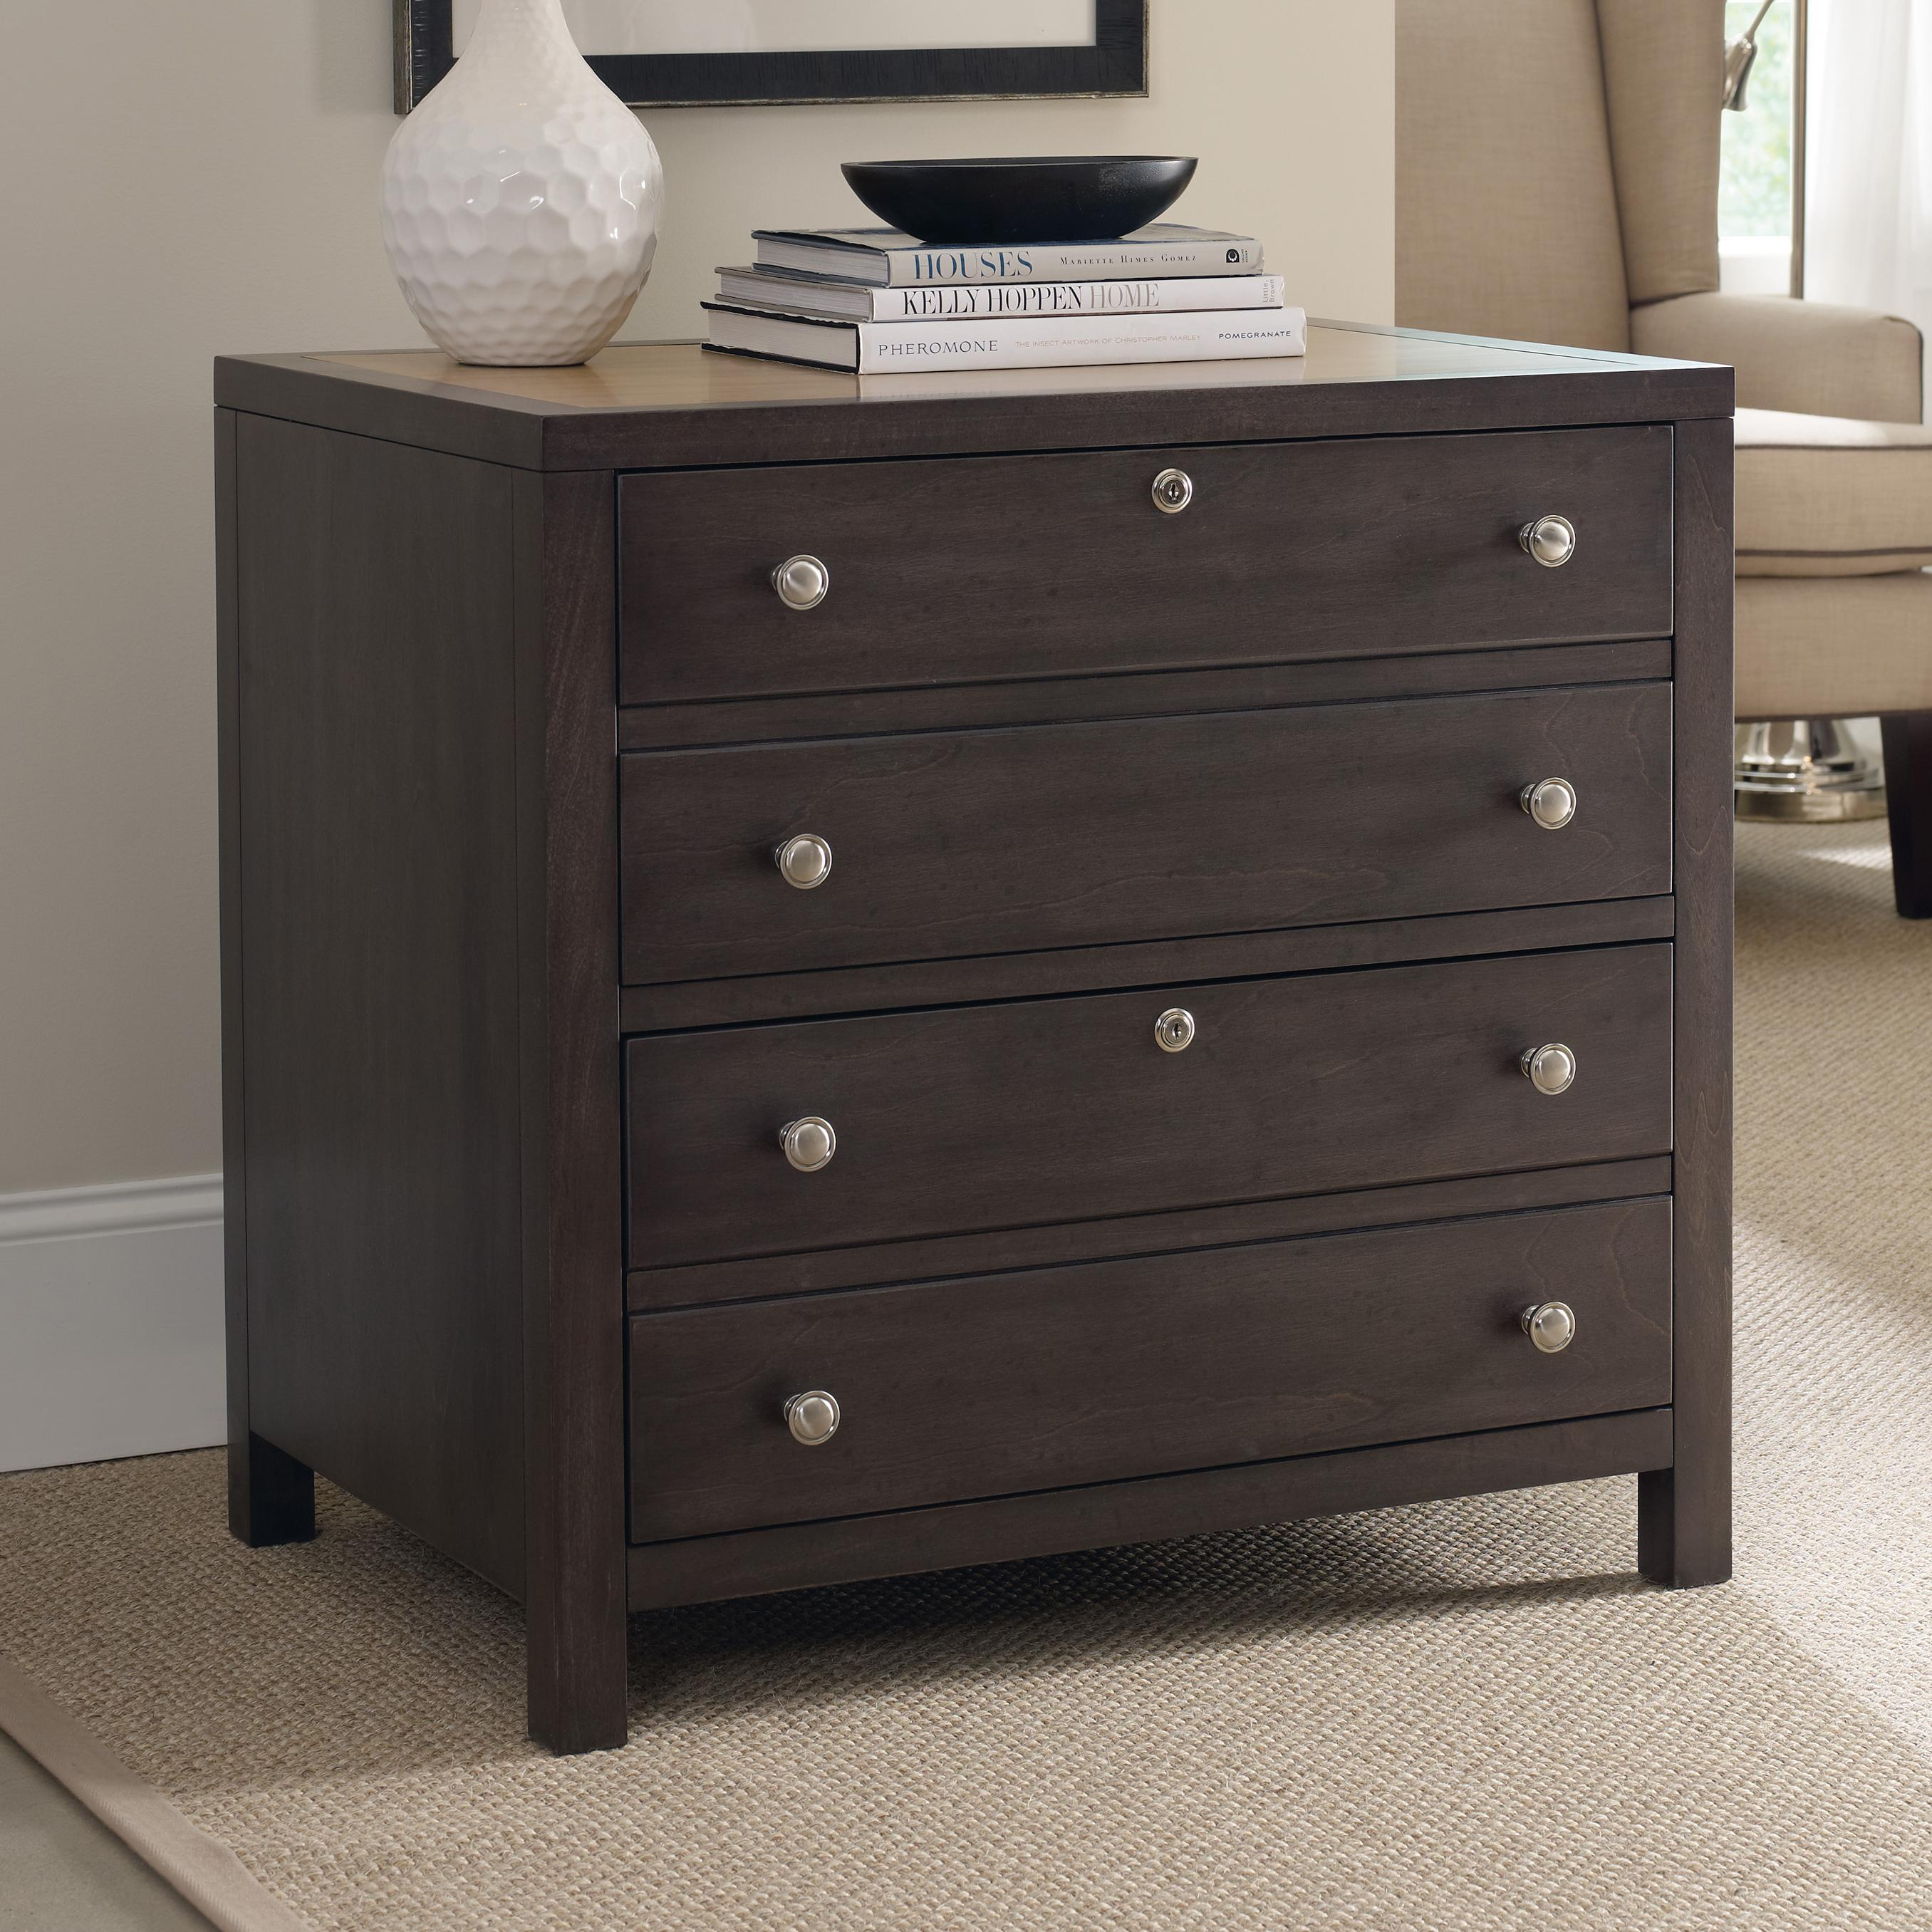 Hooker Furniture South Park 5078 10466 Lateral File Cabinet With 2 within proportions 2712 X 2712